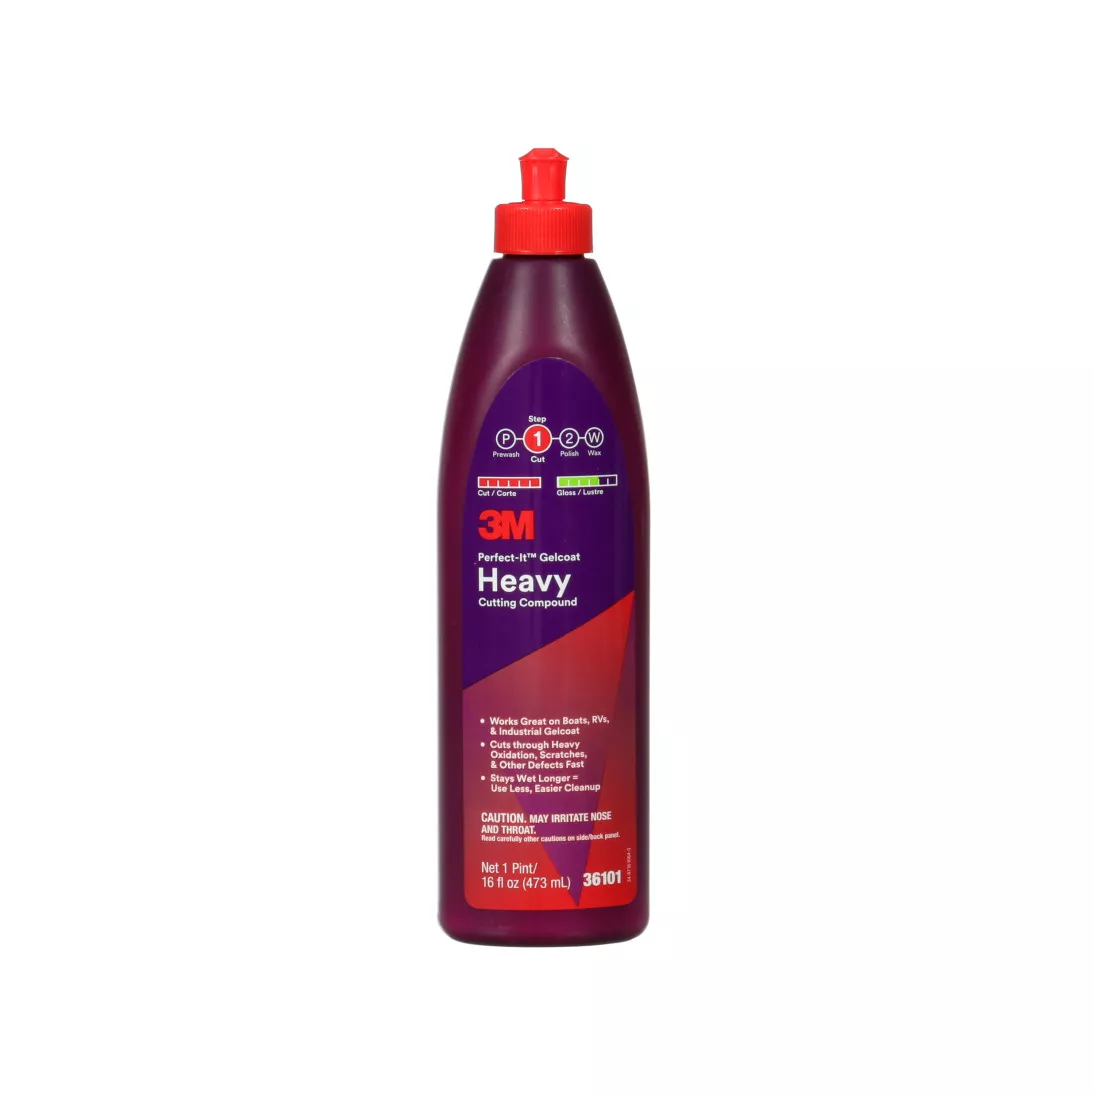 3M™ Perfect-It™ Gelcoat Heavy Cutting Compound, 36101, 1 pint (473 mL),
6 per case